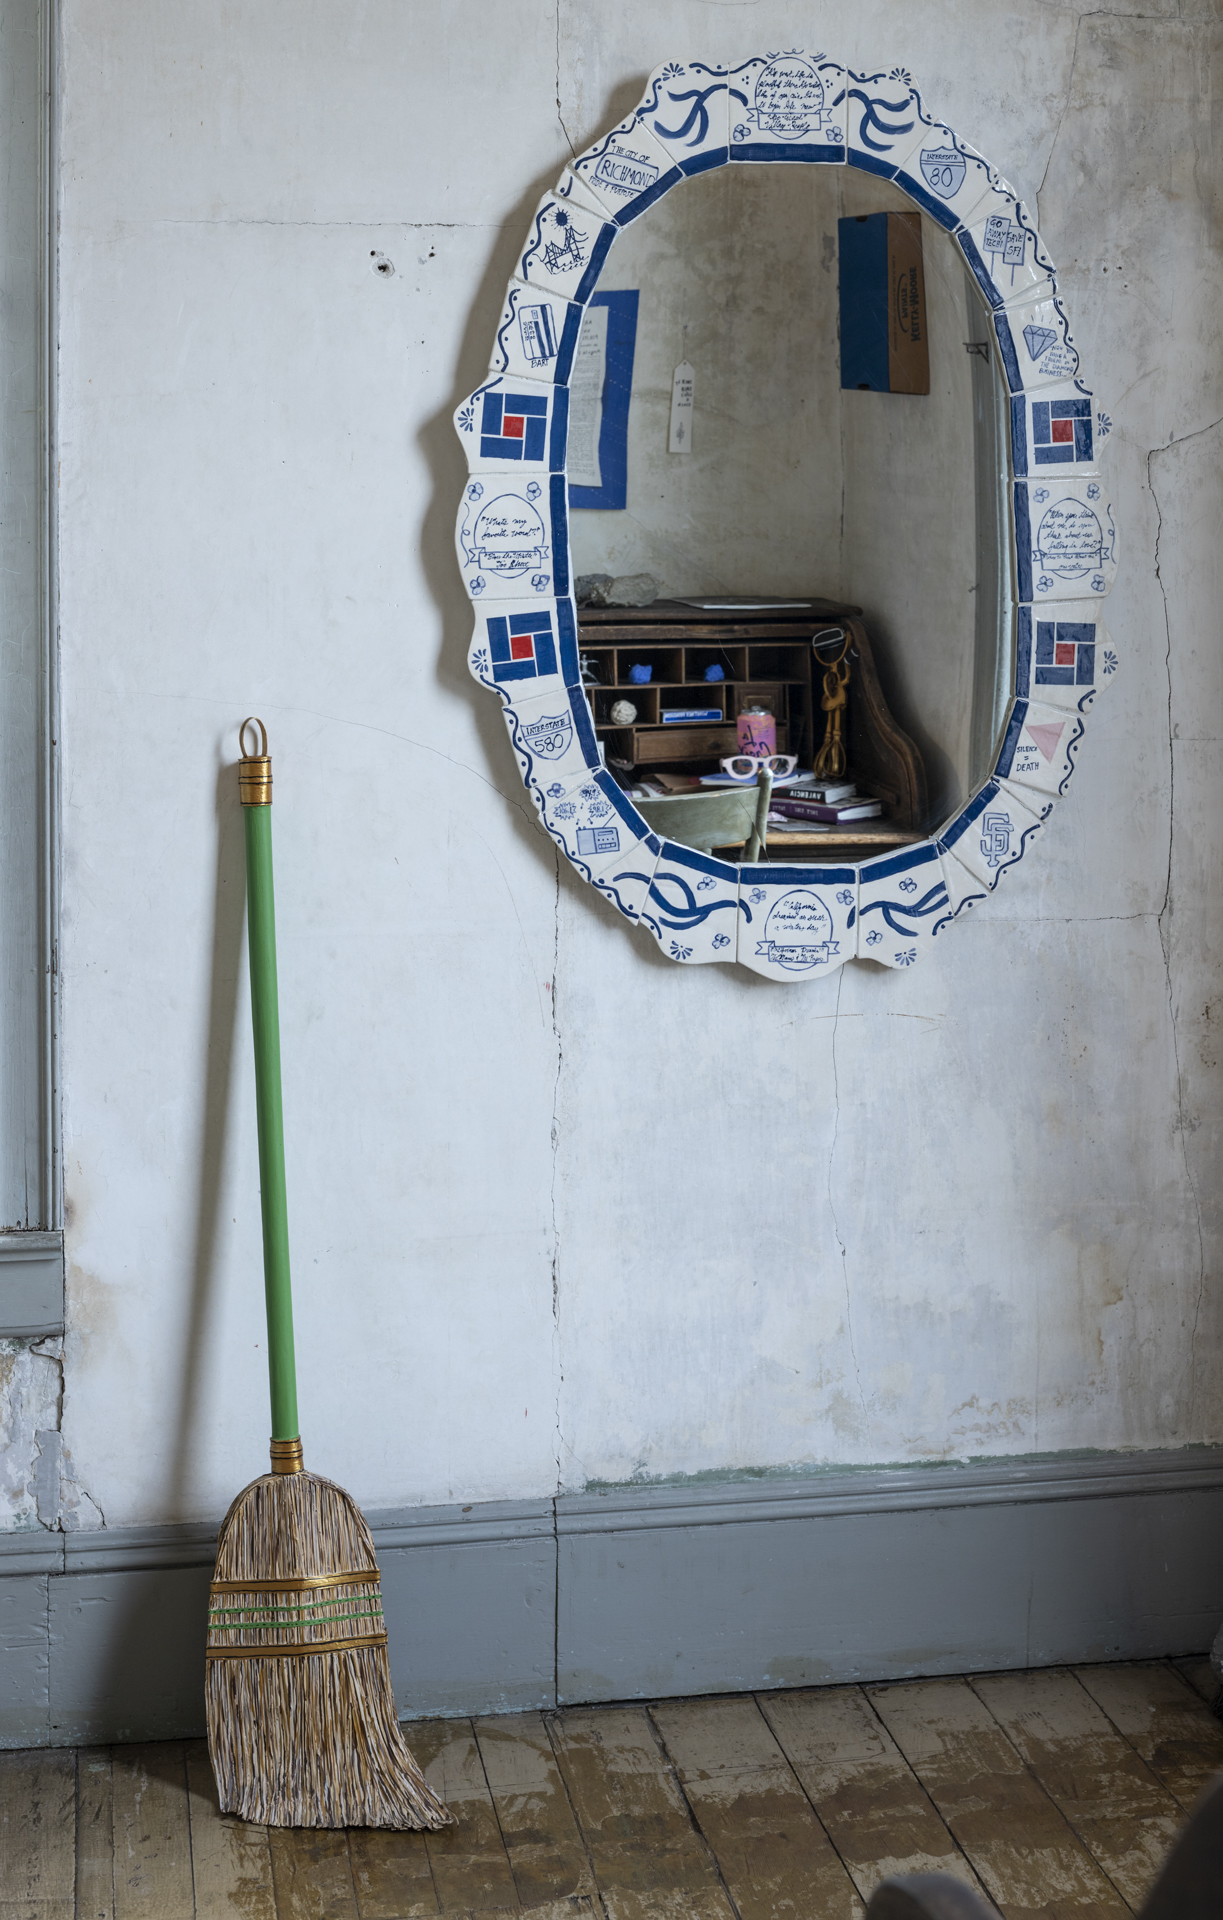 Paper painted broom leans against wall beside large oval mirror with cluttered desk reflected